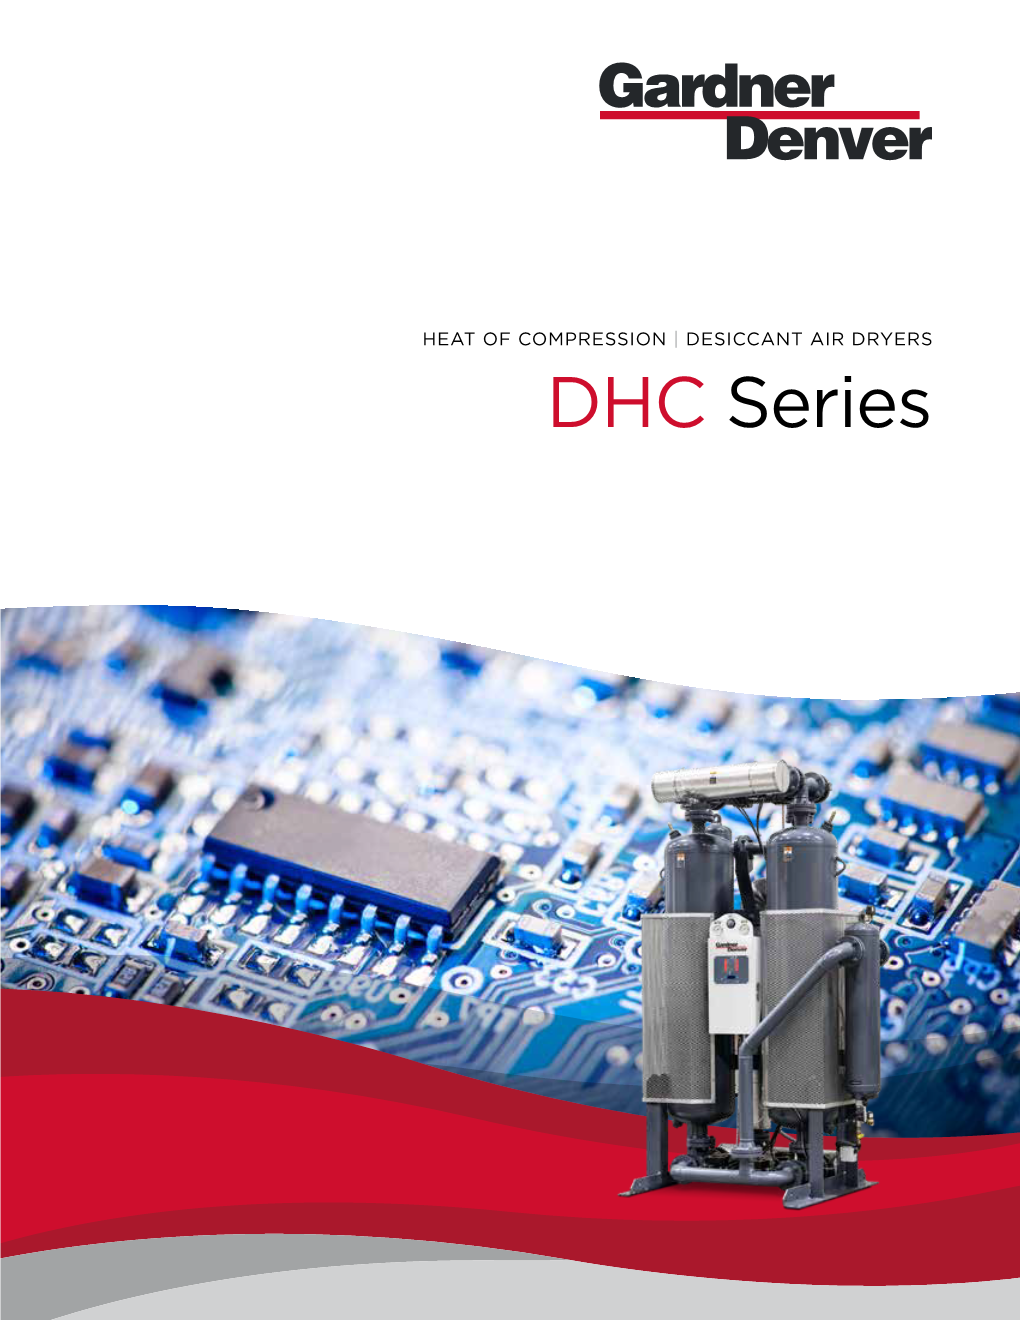 DHC Series Why Heat of Compression? Benefits